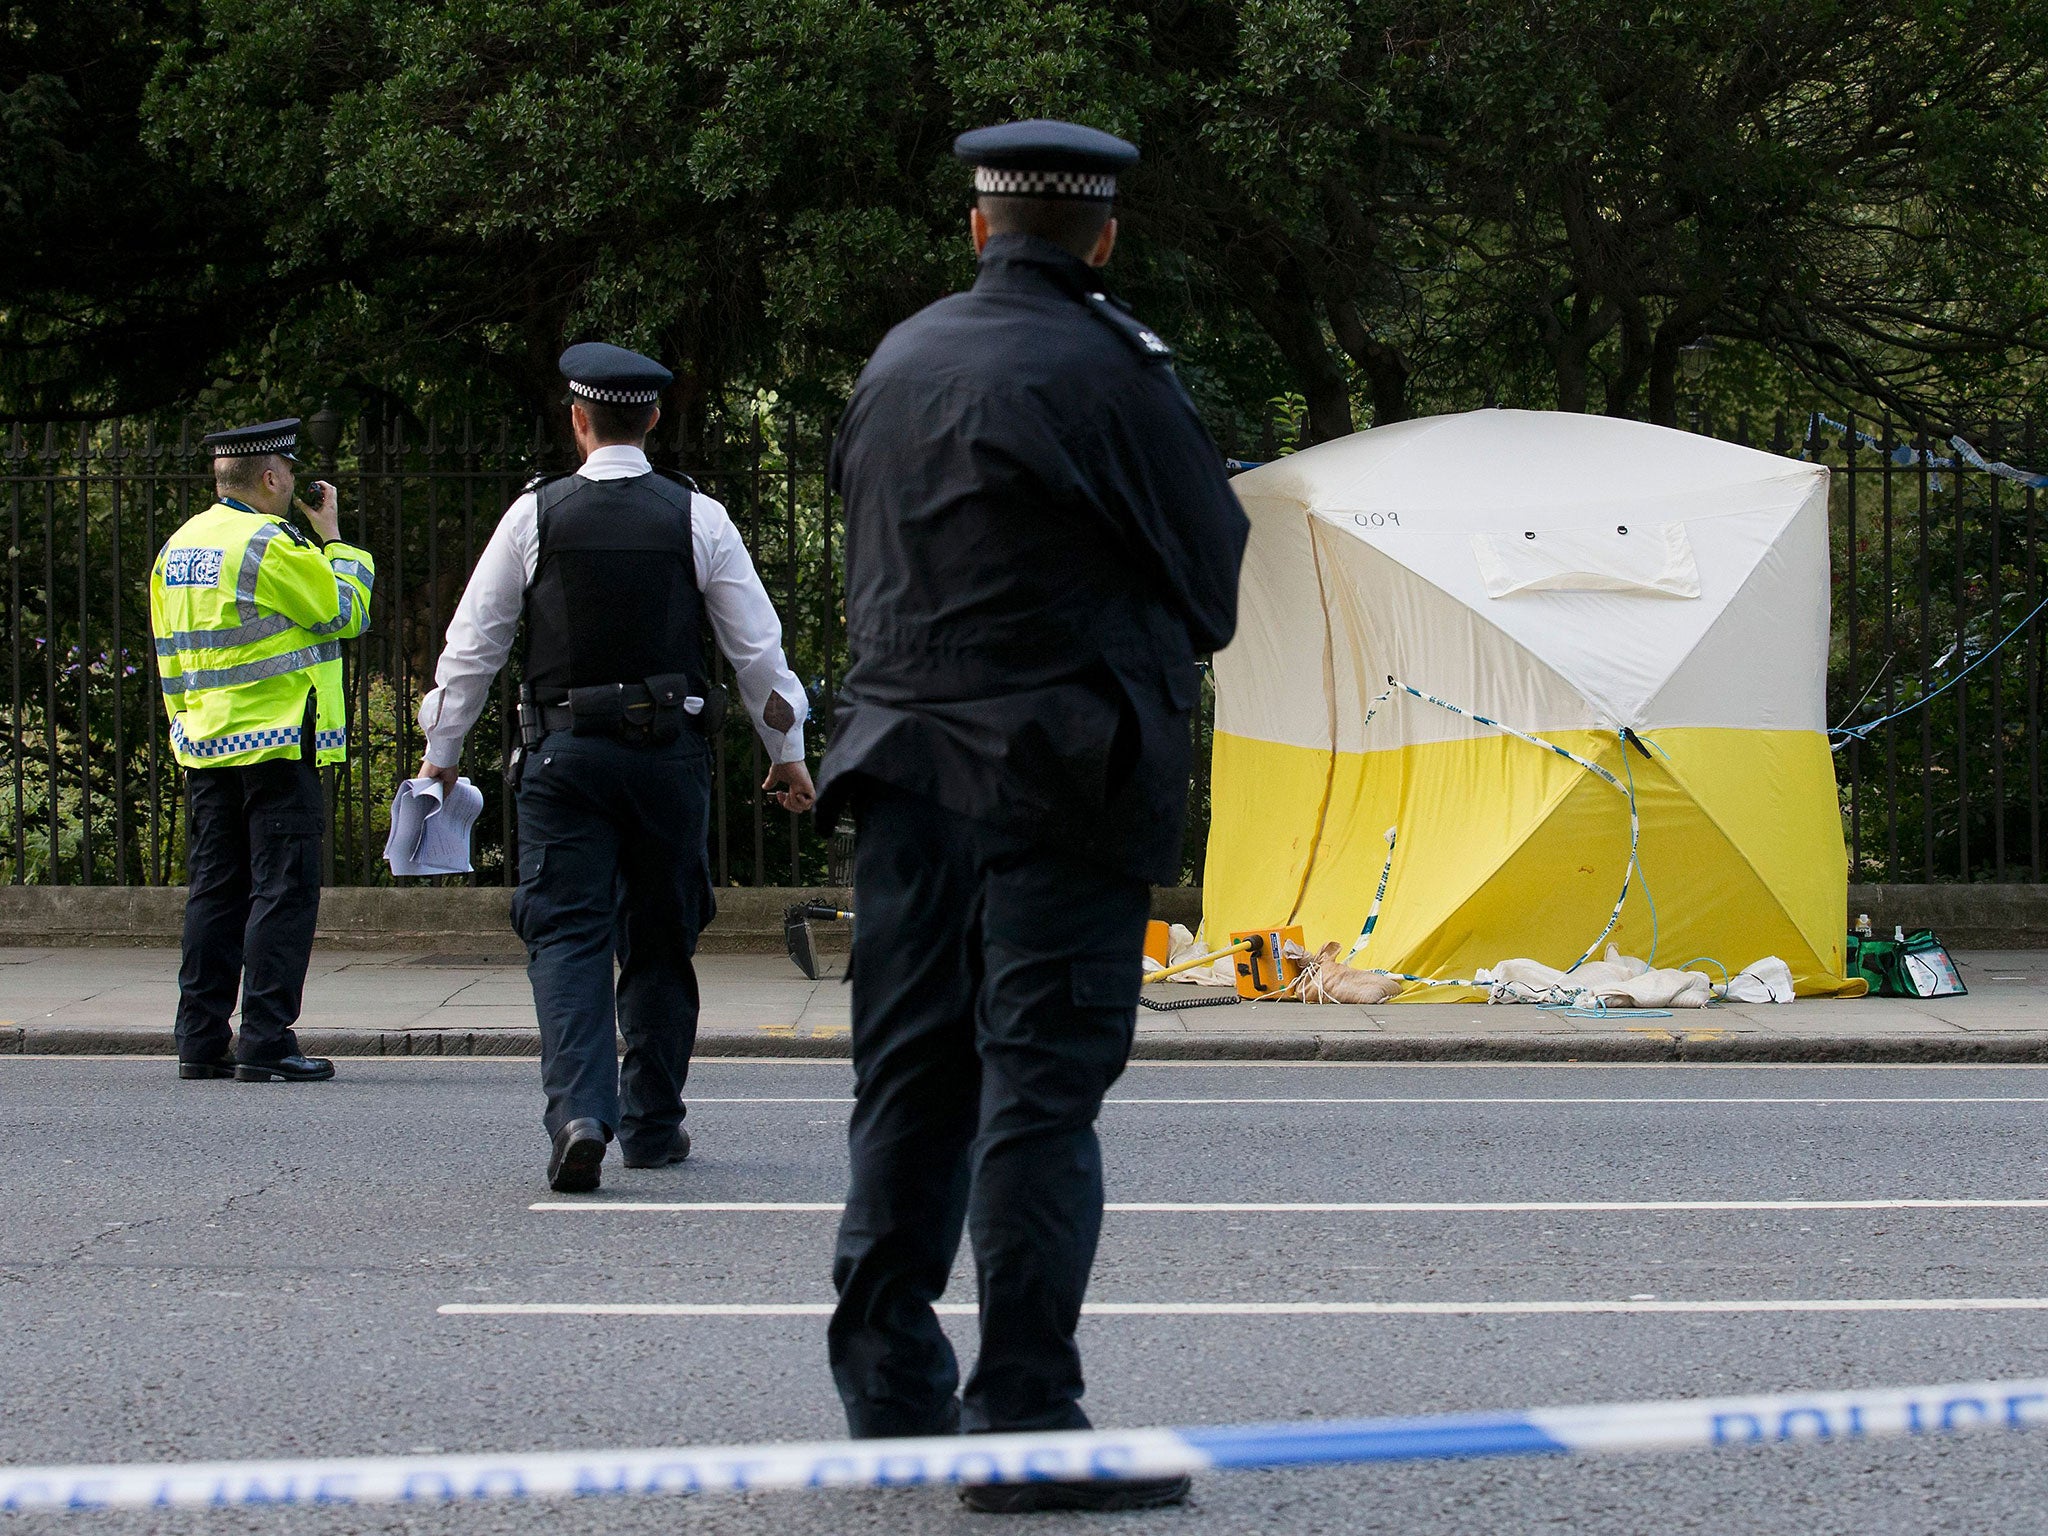 Police at the scene of a stabbing attack in Russell Square in central London on August 4, 2016